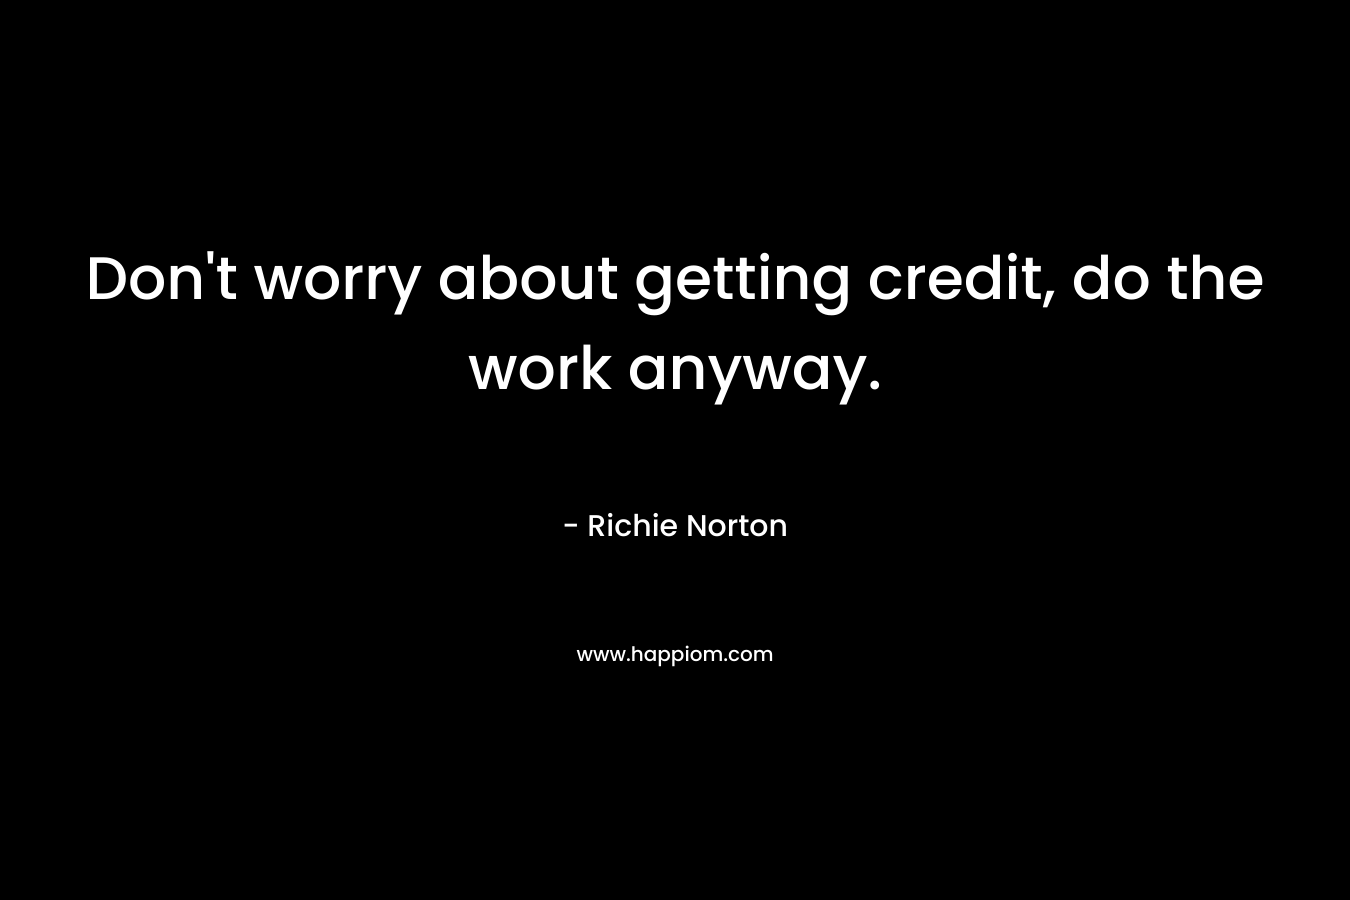 Don't worry about getting credit, do the work anyway.